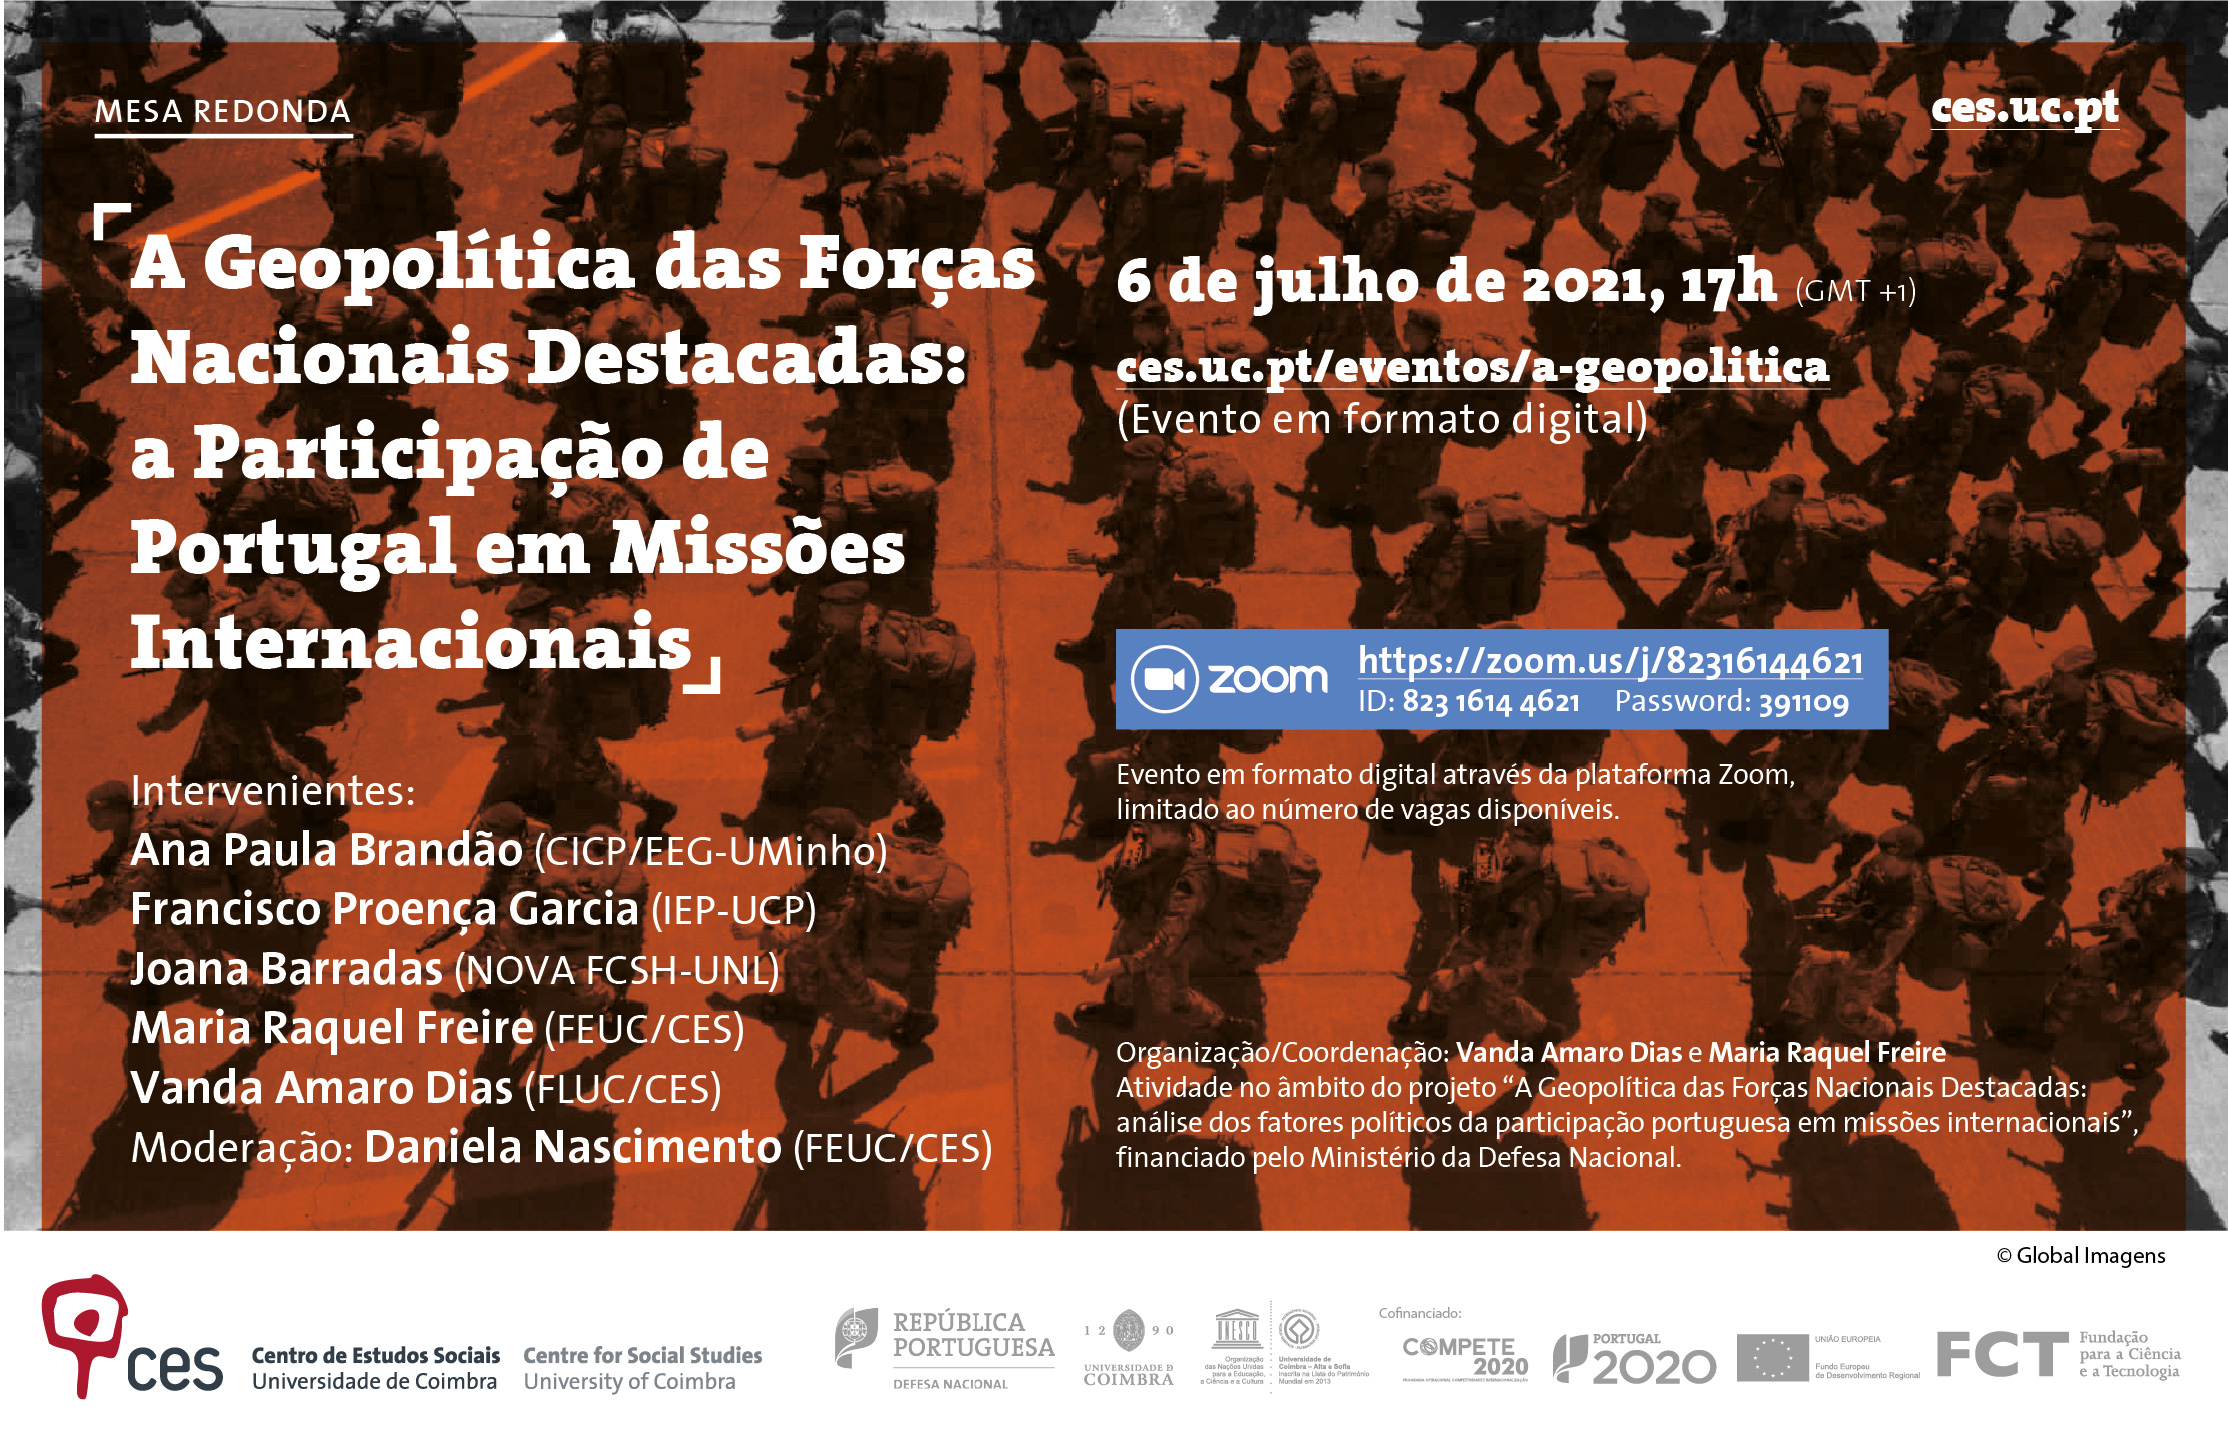 The Geopolitics of National Detached Forces: Portugal's Participation in International Missions<br />

	 <span id="edit_34580"><script>$(function() { $('#edit_34580').load( "/myces/user/editobj.php?tipo=evento&id=34580" ); });</script></span>